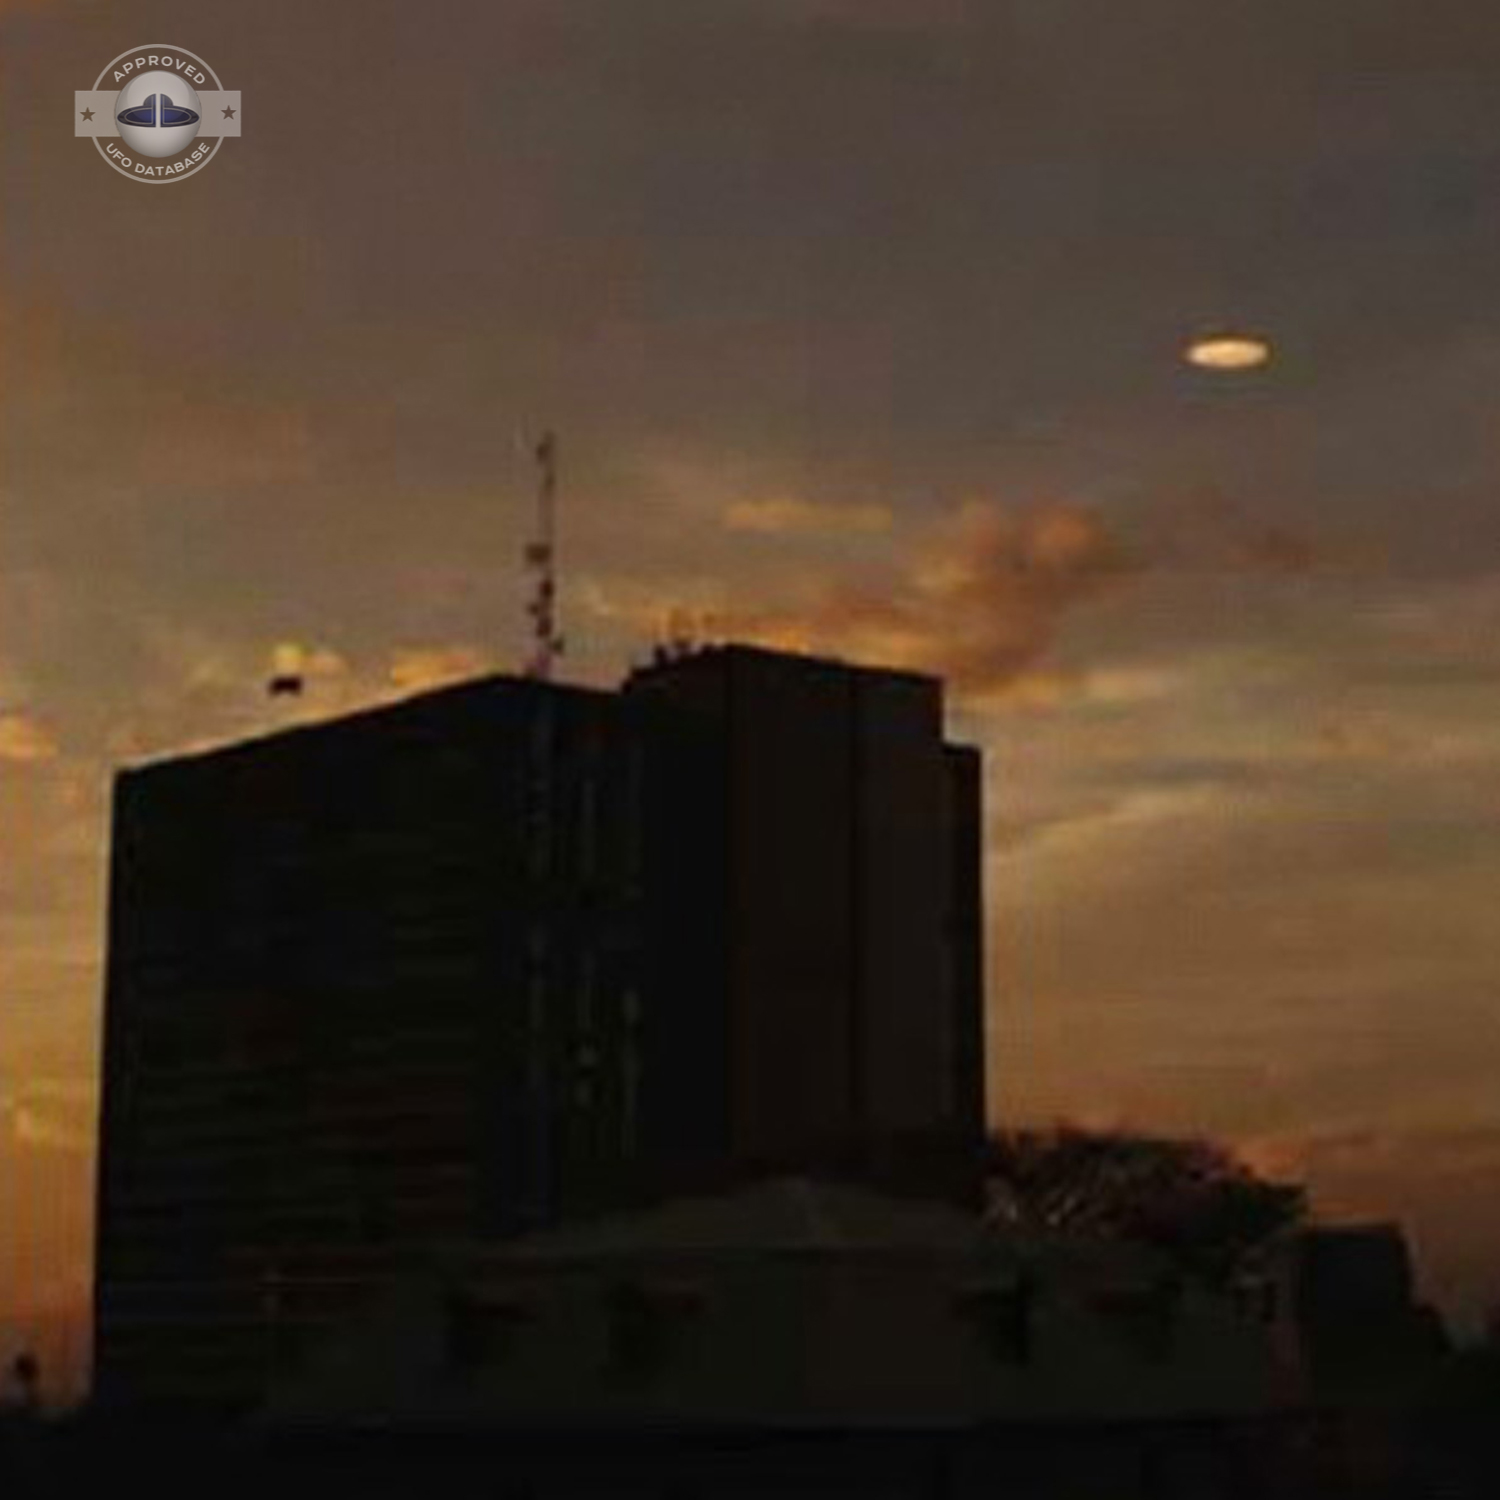 UFO picture showing a bright flat round disc passing near a building UFO Picture #54-2